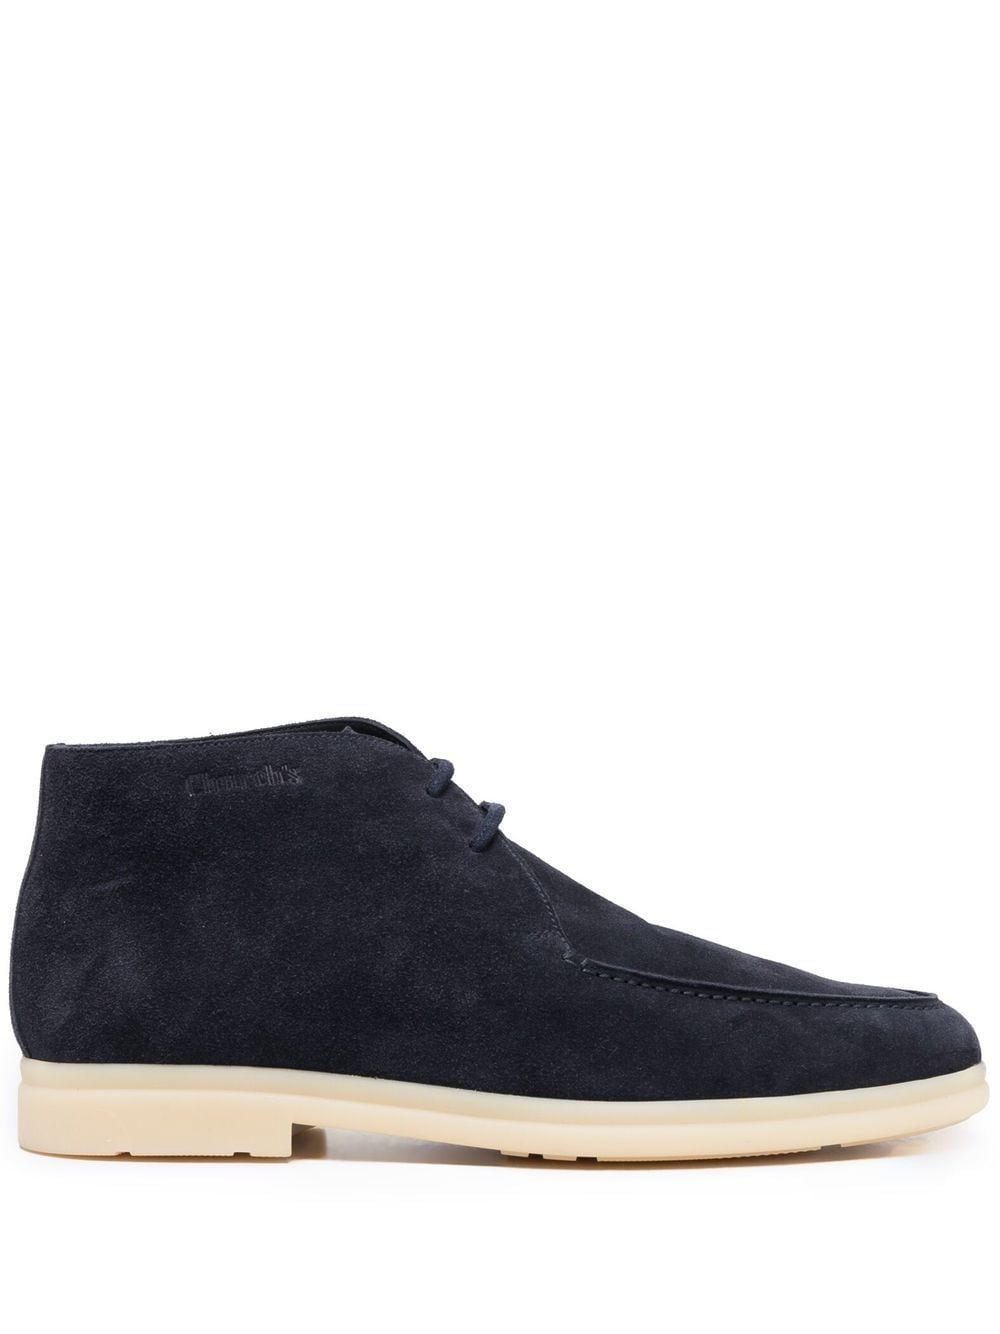 Image 1 of Church's Goring soft suede lace-up boots